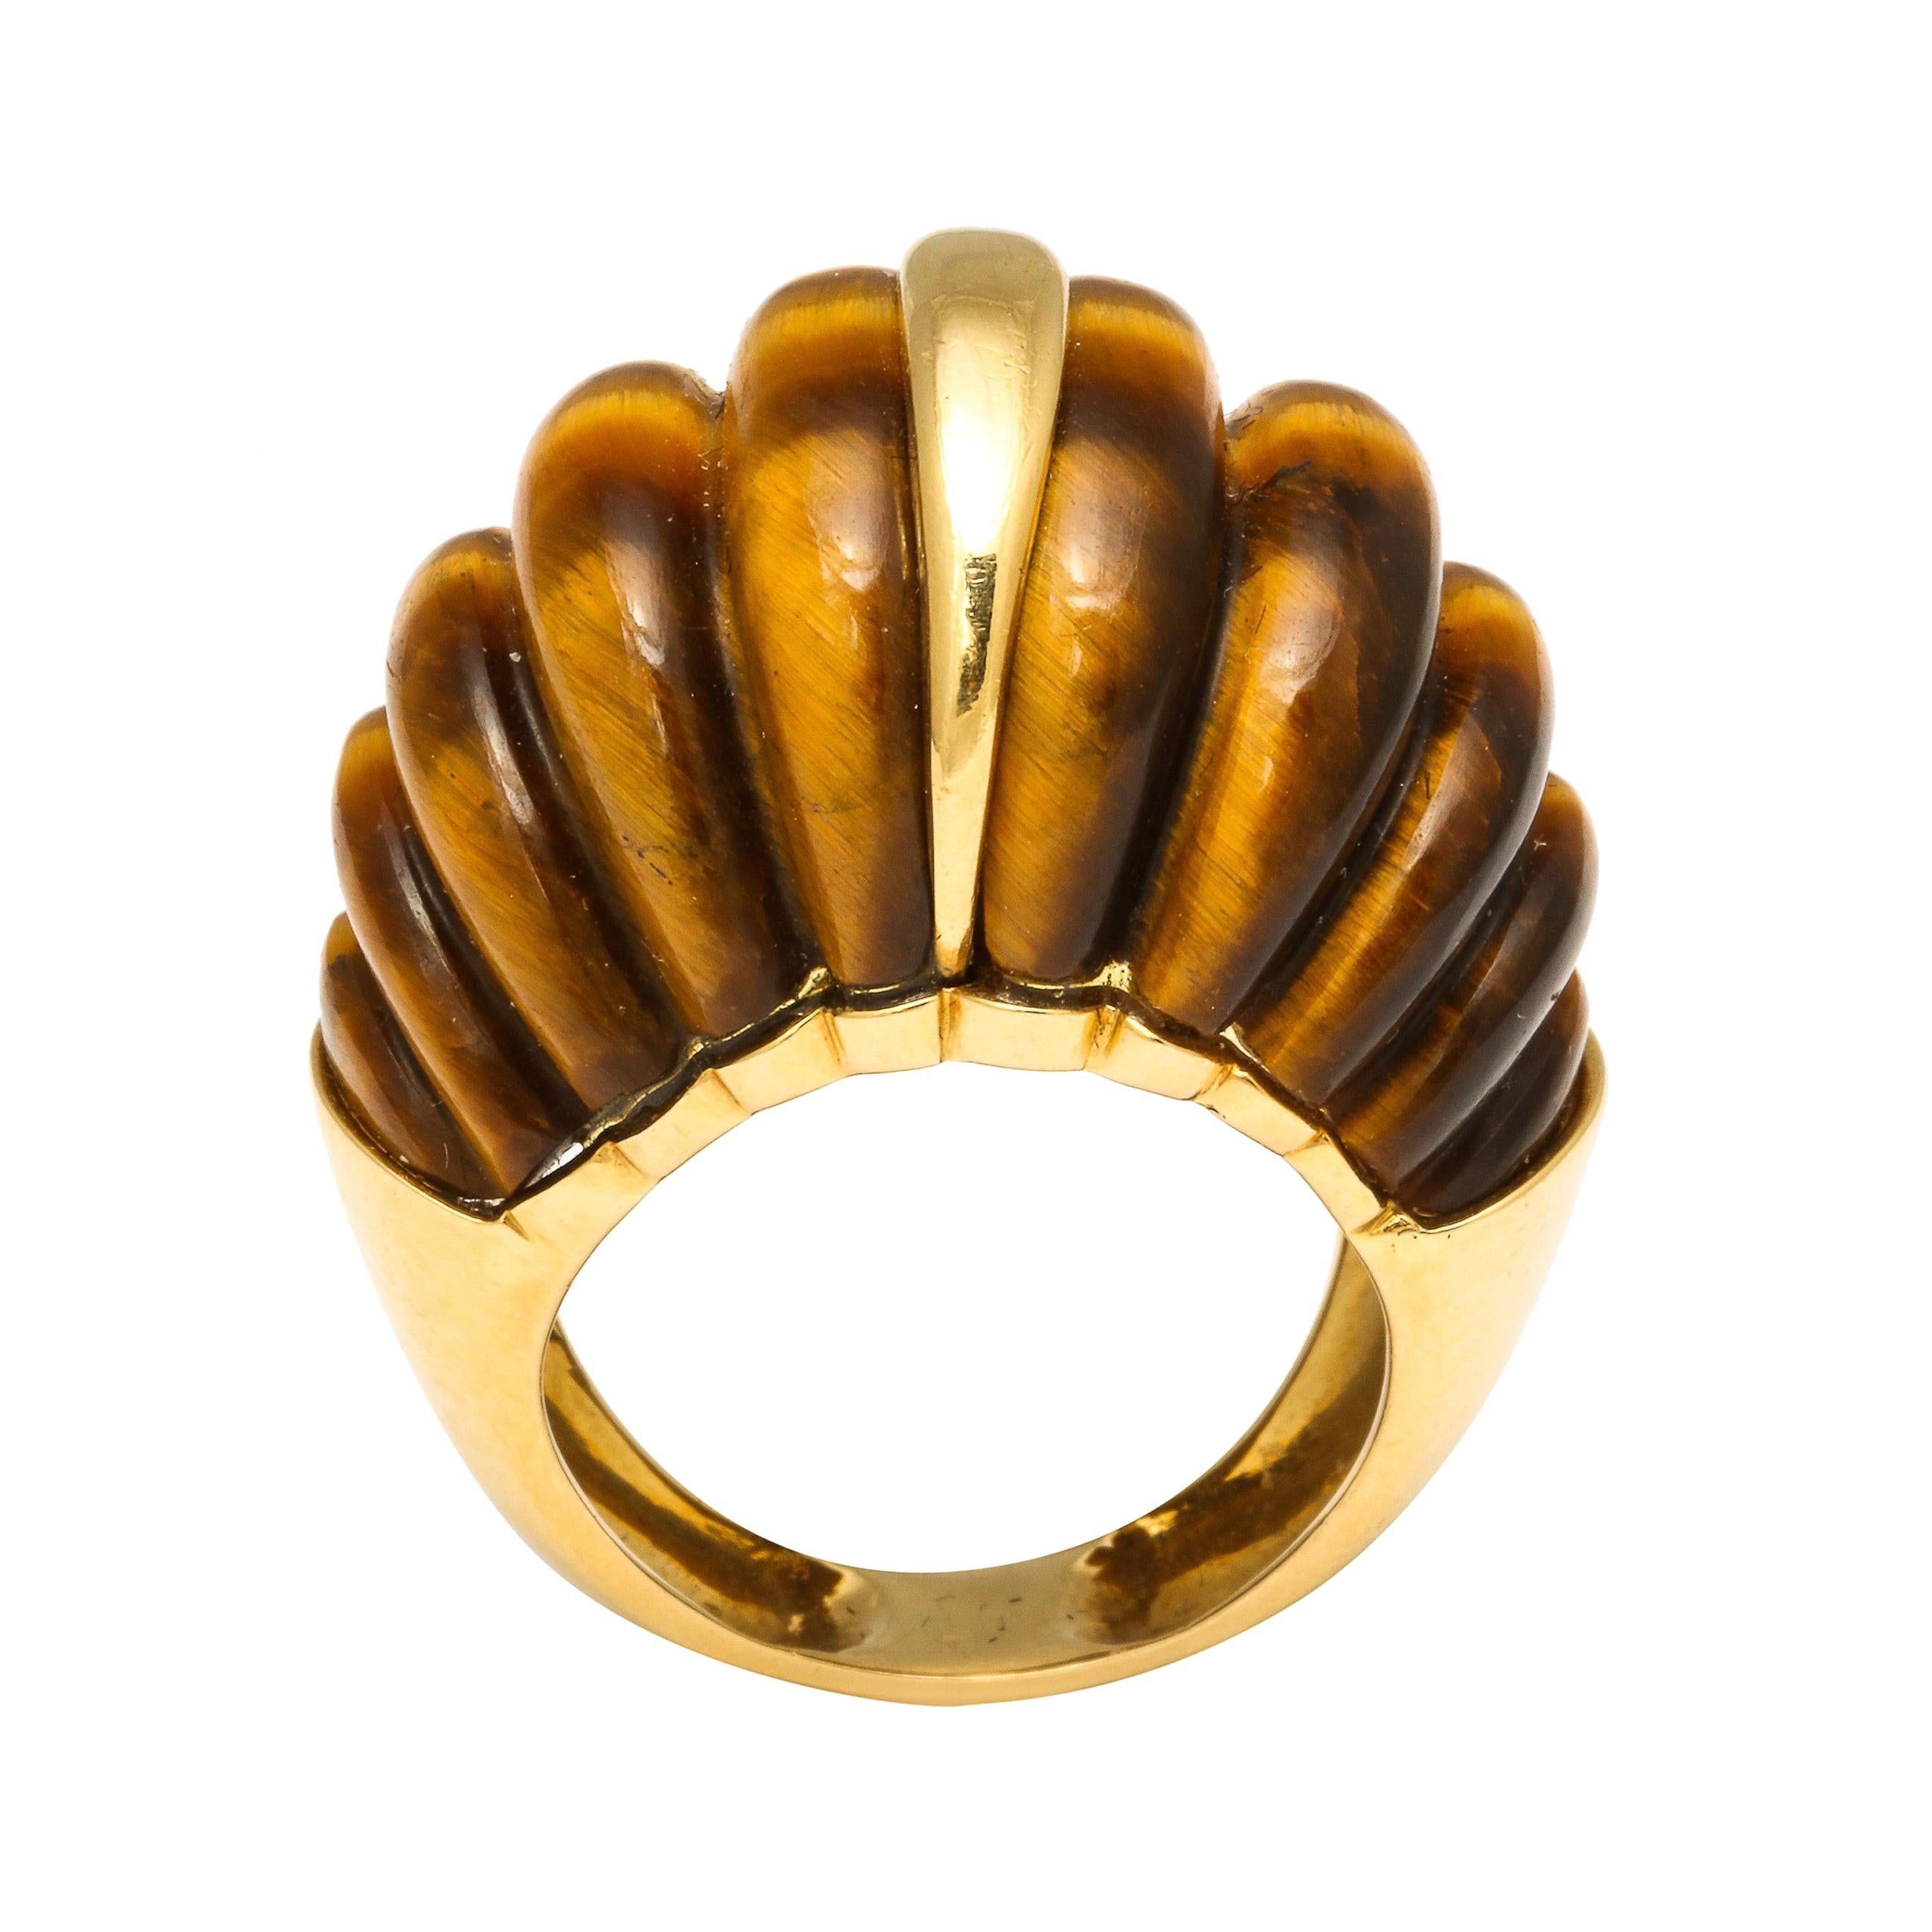 Tiger's Eye Melon Shaped Ring with Center Gold Bar